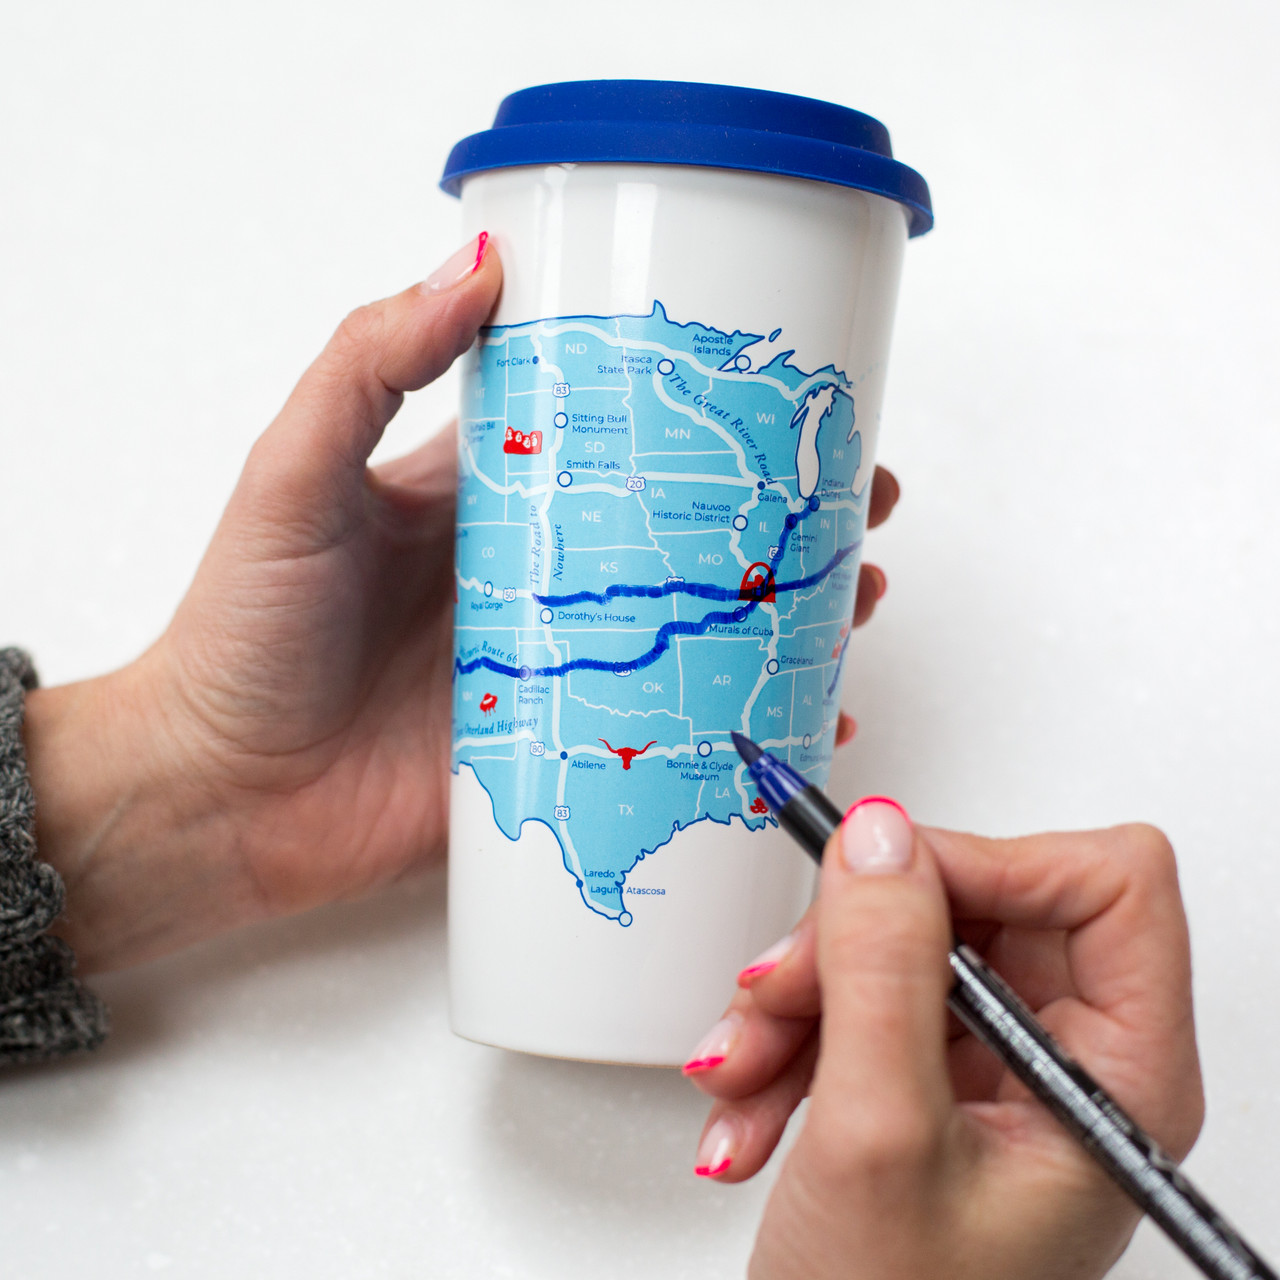 https://cdn11.bigcommerce.com/s-auakhr0wuh/images/stencil/1280x1280/products/131/653/Trouvaille_US_Road_Trip_Mug_2__48399.1646667205.jpg?c=2